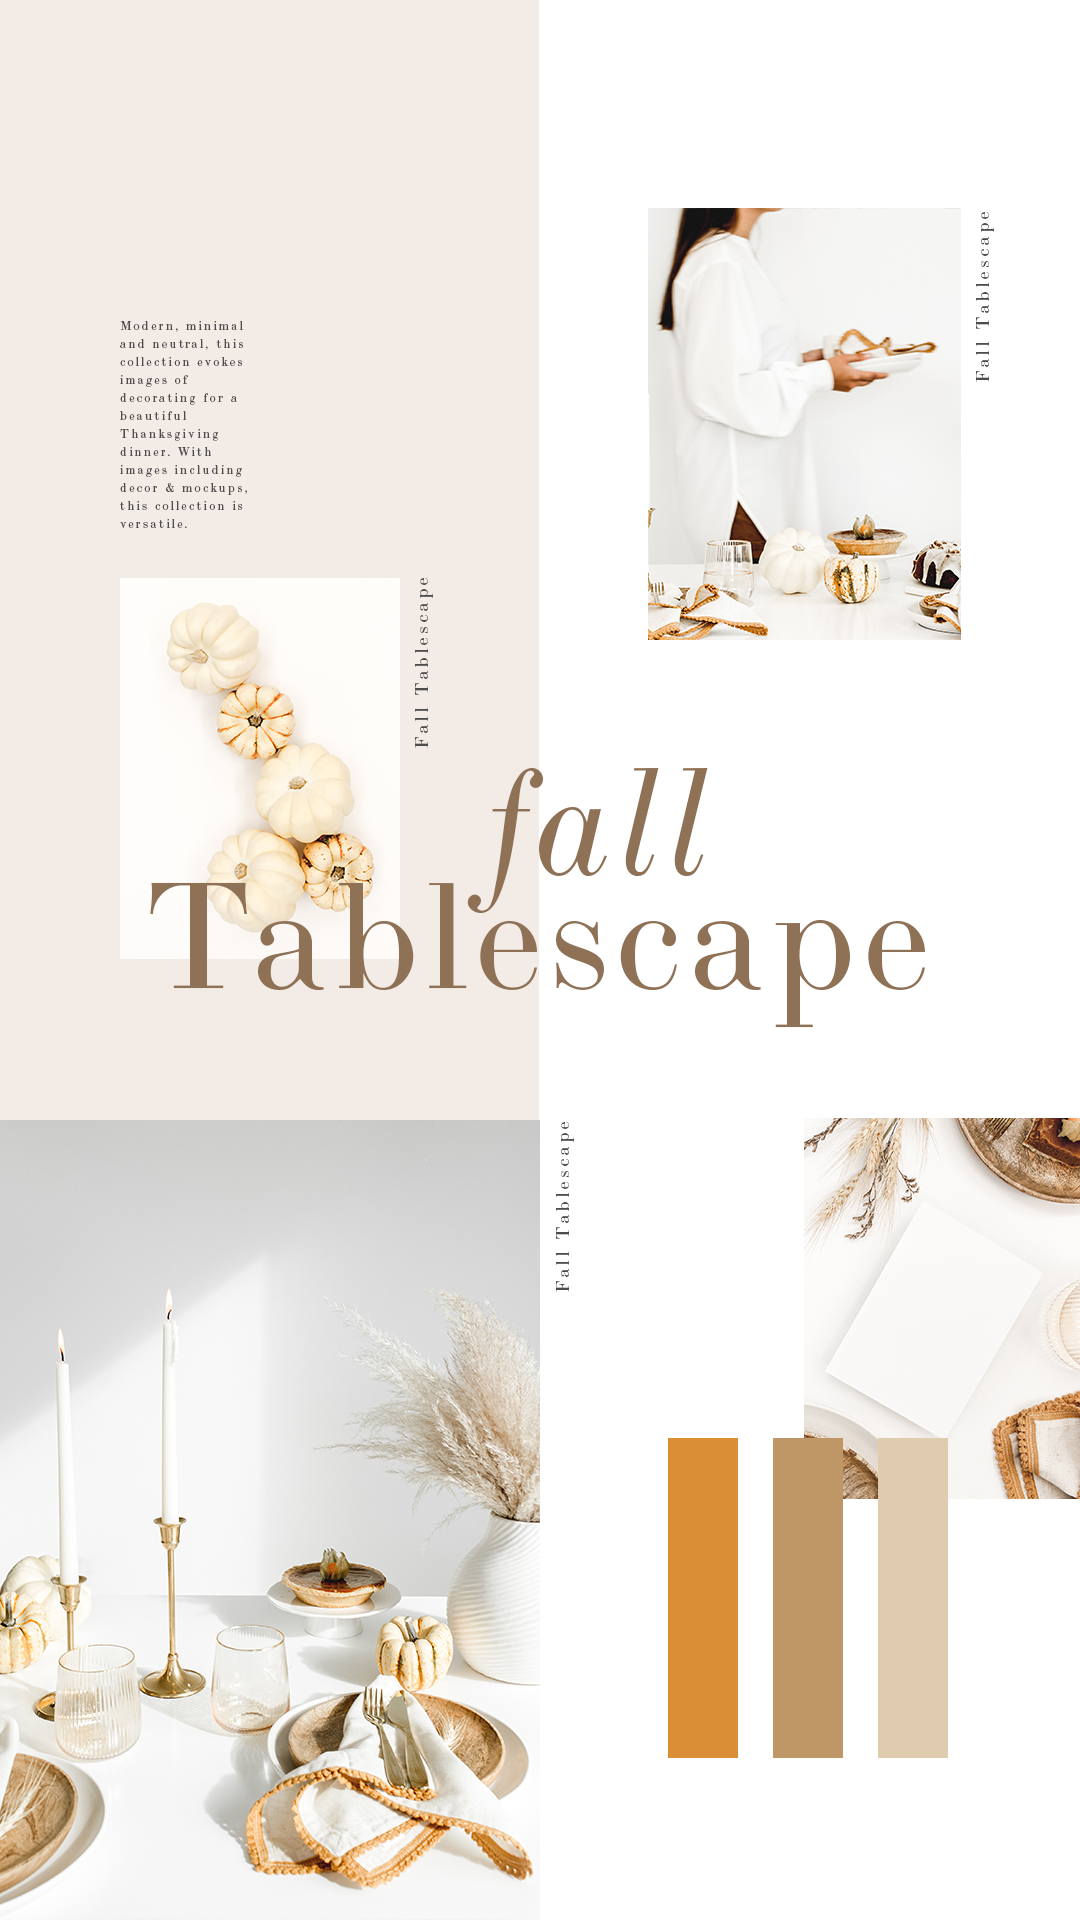 Neutral fall decor stock photos. Entertaining stock photos. Autumn stock photos. Fall tablescape stock photos. Available exclusively for Haute Stock Members. Click to view collection.